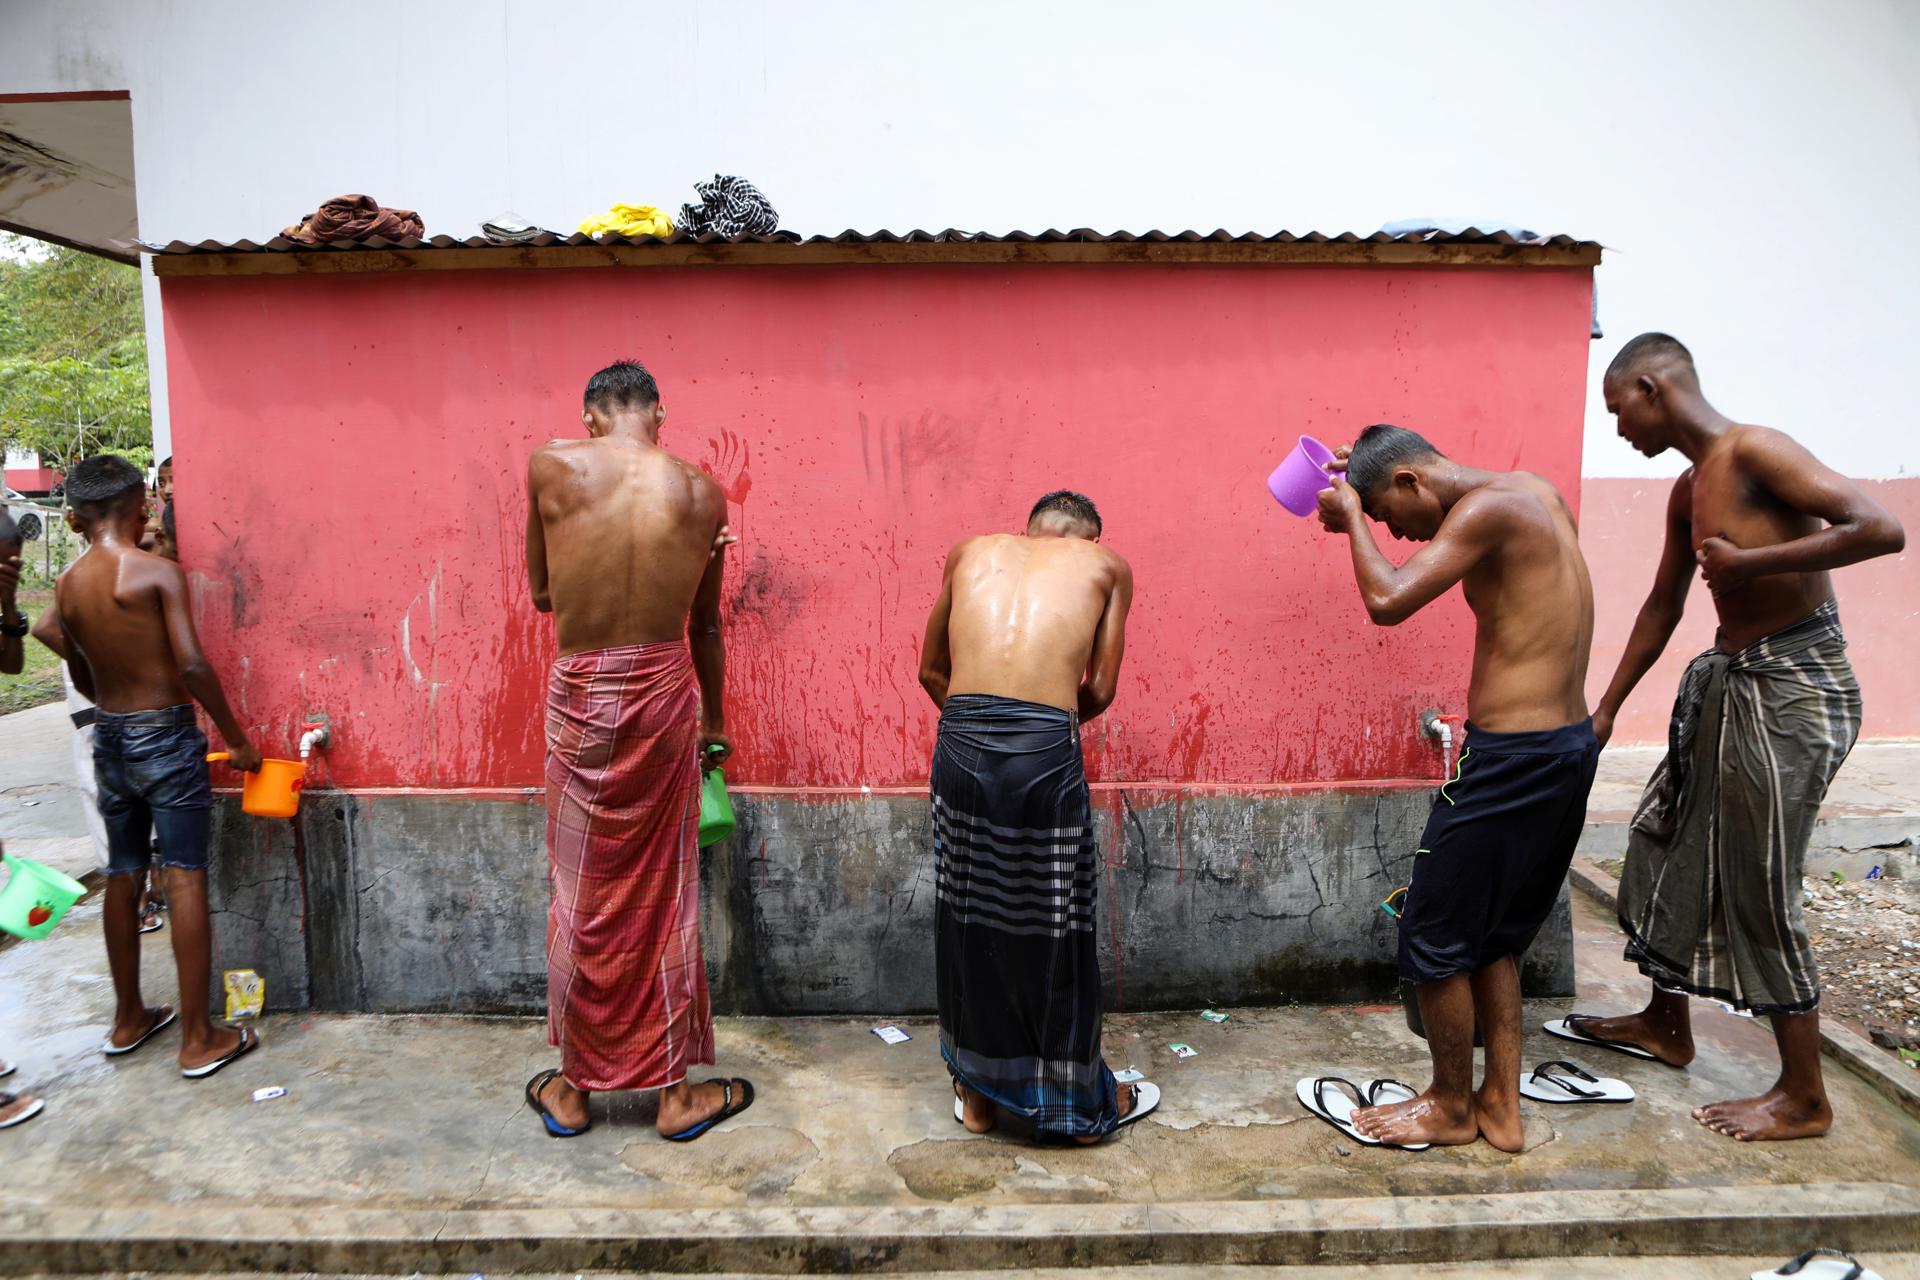 Rohingya refugees take a bath at their temporary shelter provided by Aceh local Goverment in Pidie, Aceh, Indonesia, 28 December 2022. EFE/FILE/HOTLI SIMANJUNTAK